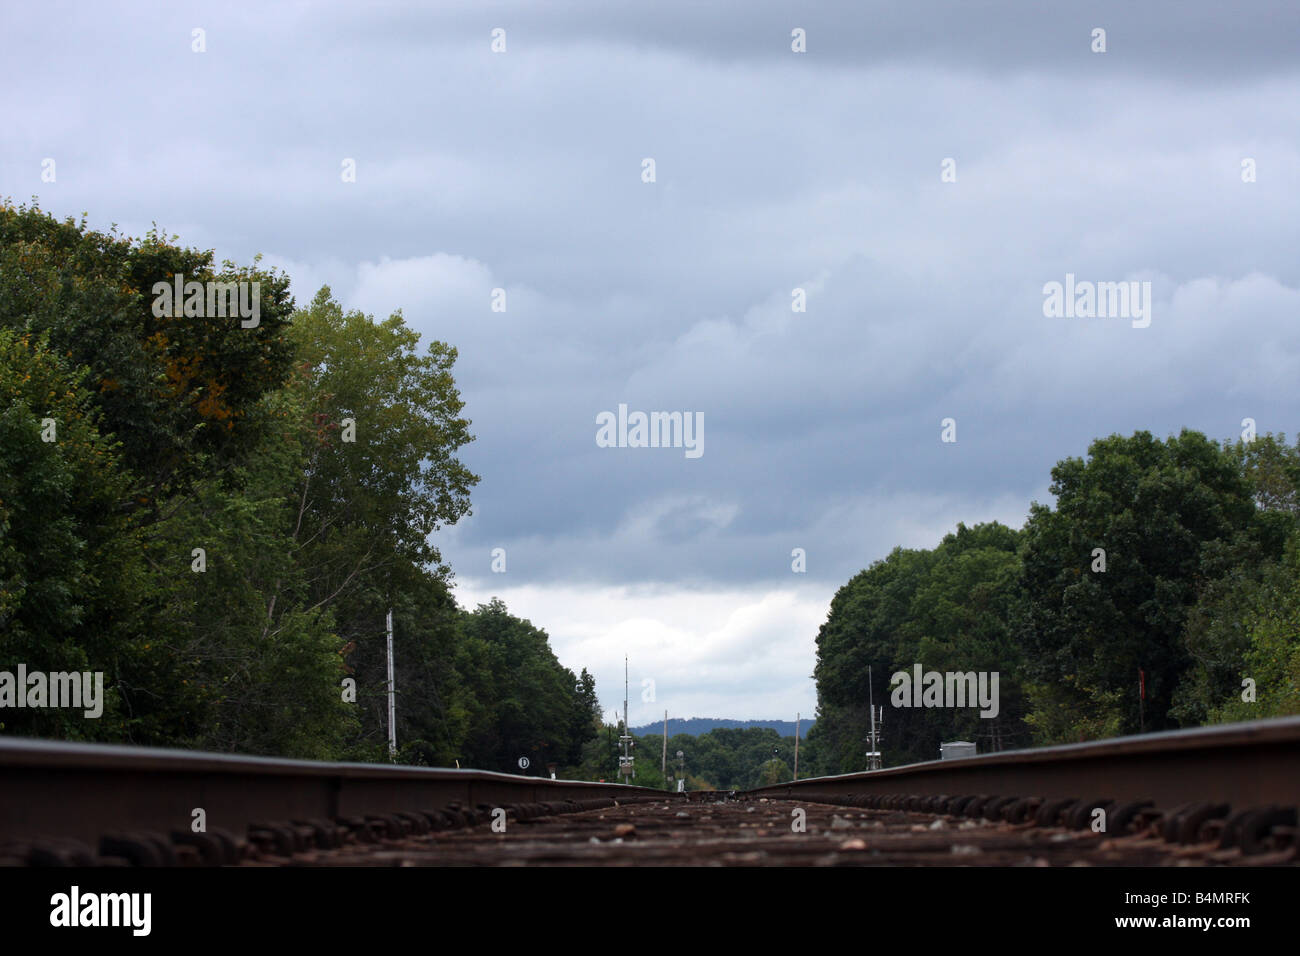 Railroad tracks and traffic signals in western Wisconsin Stock Photo